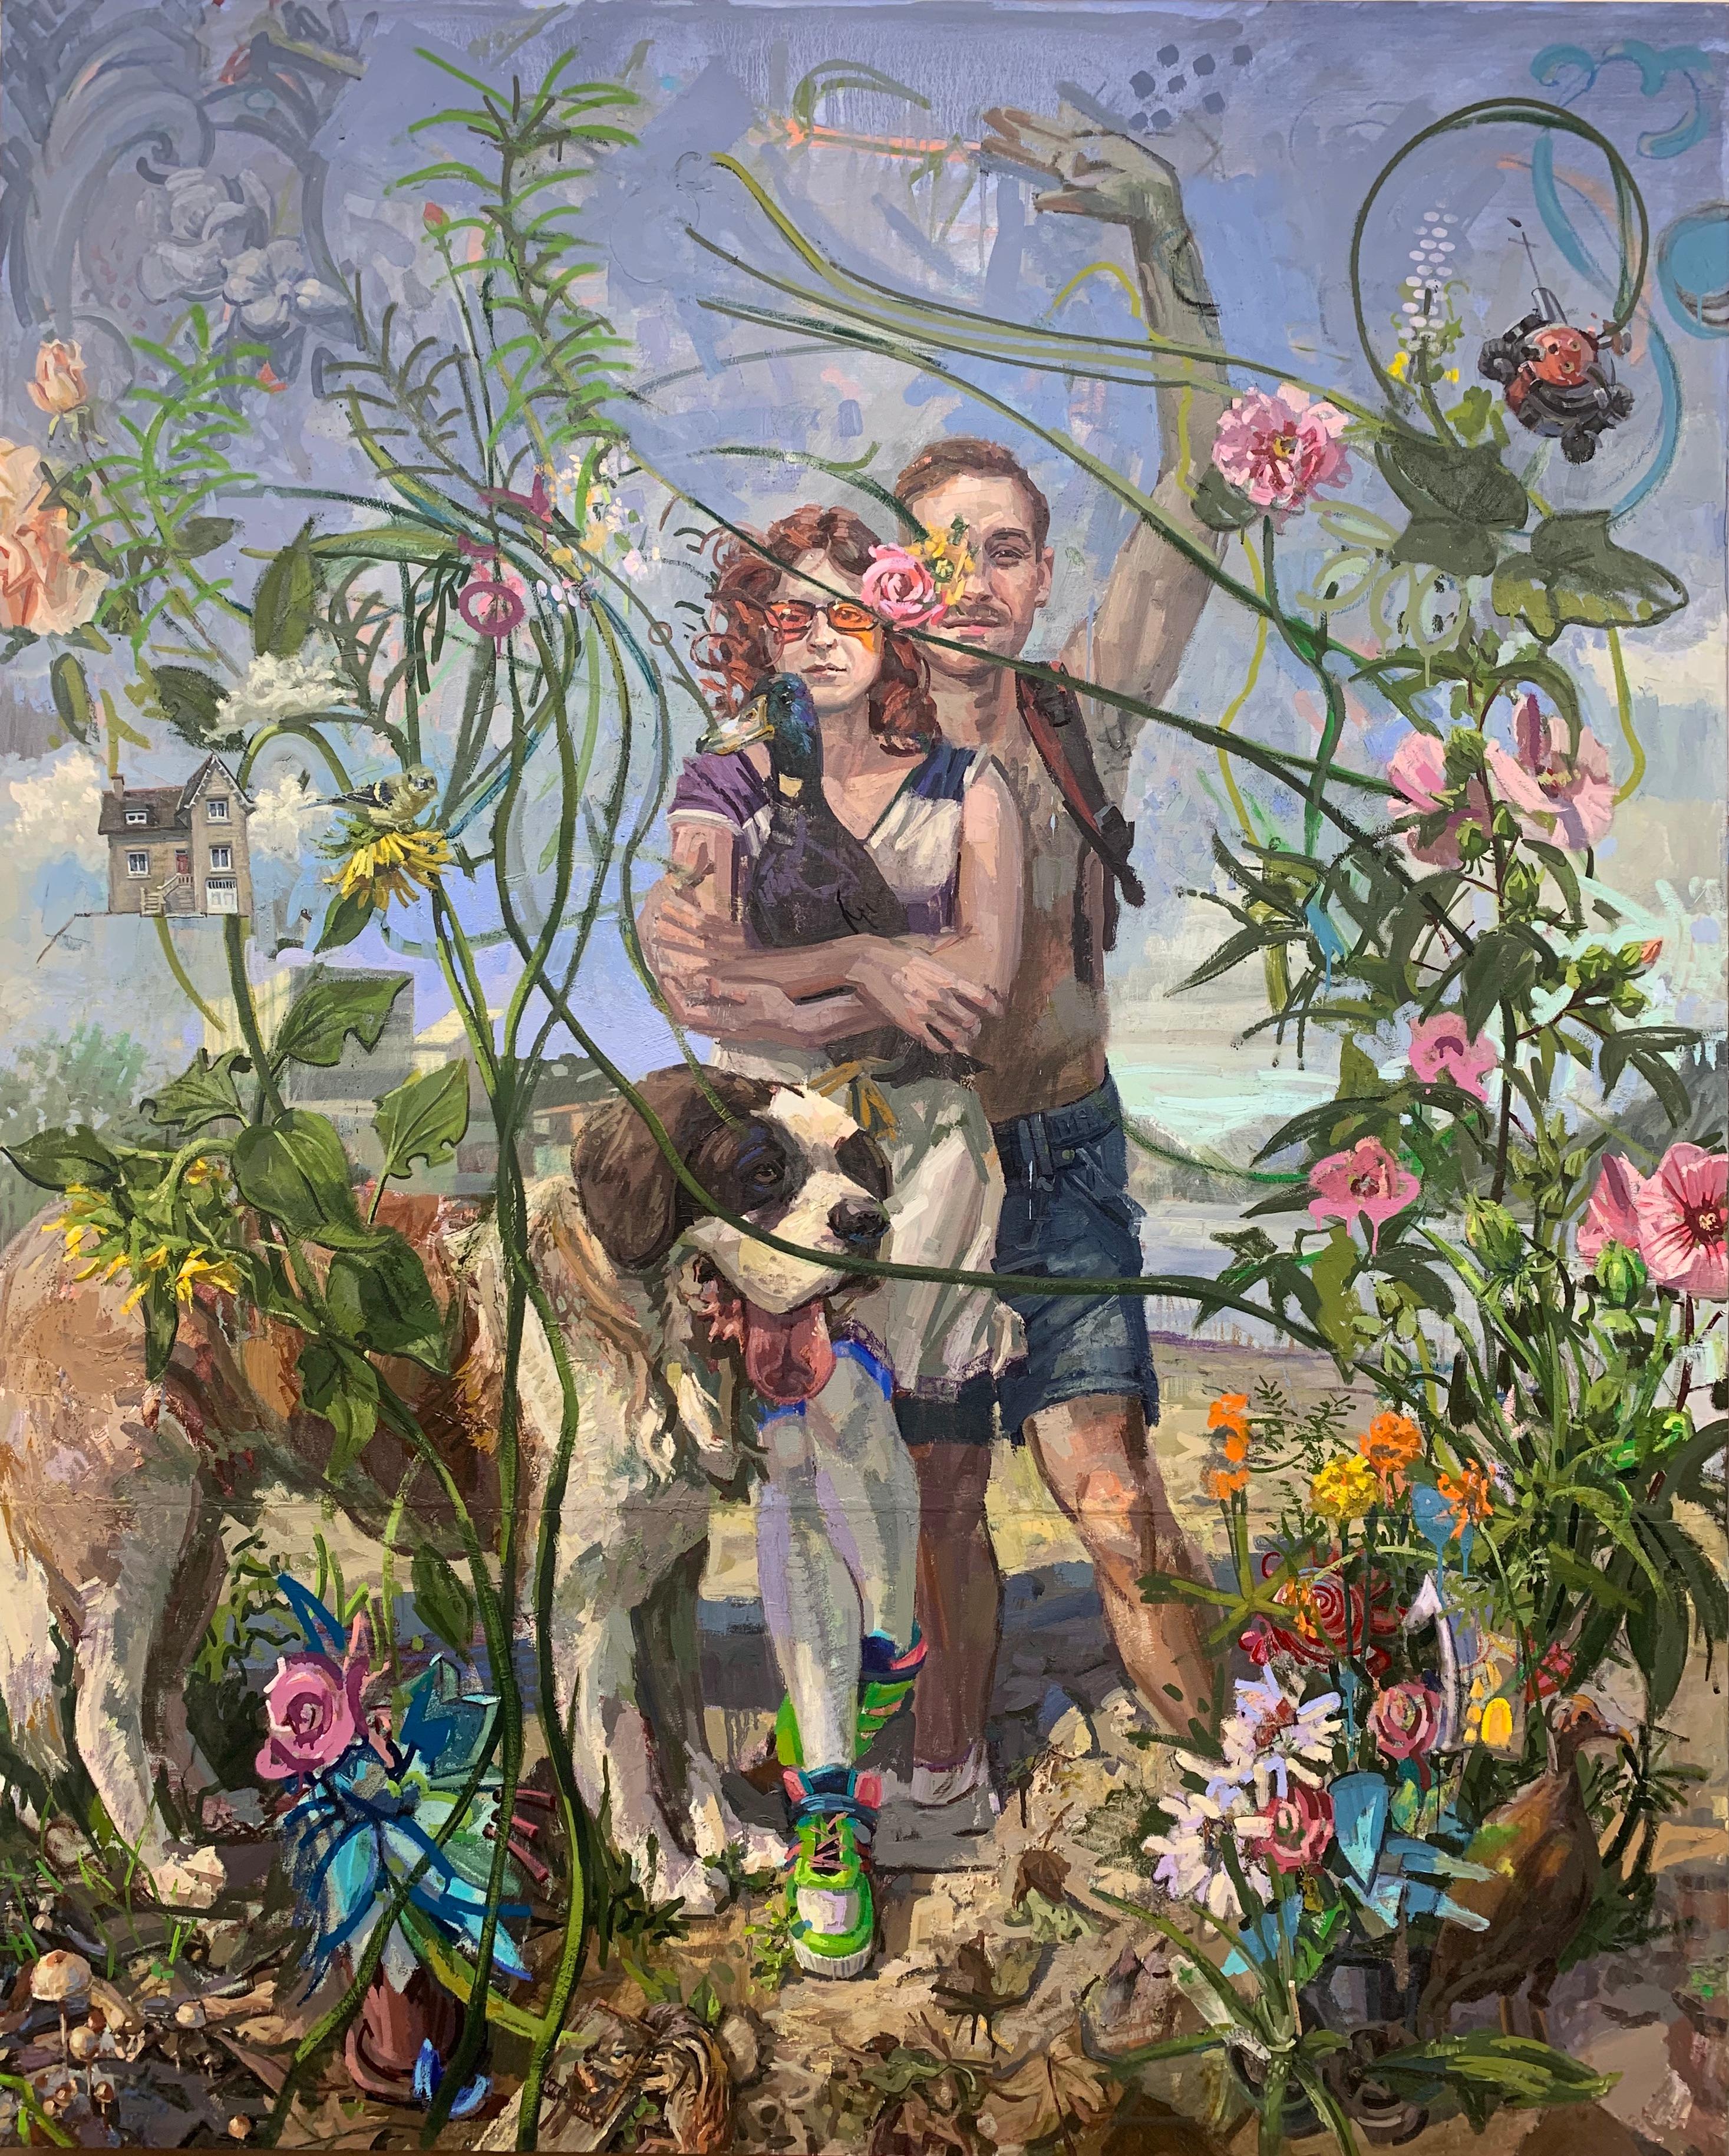 Benjamin Duke Figurative Painting - Untitled (In the Garden) - Surreal Scene w/ Couple and Their St. Bernard Dog